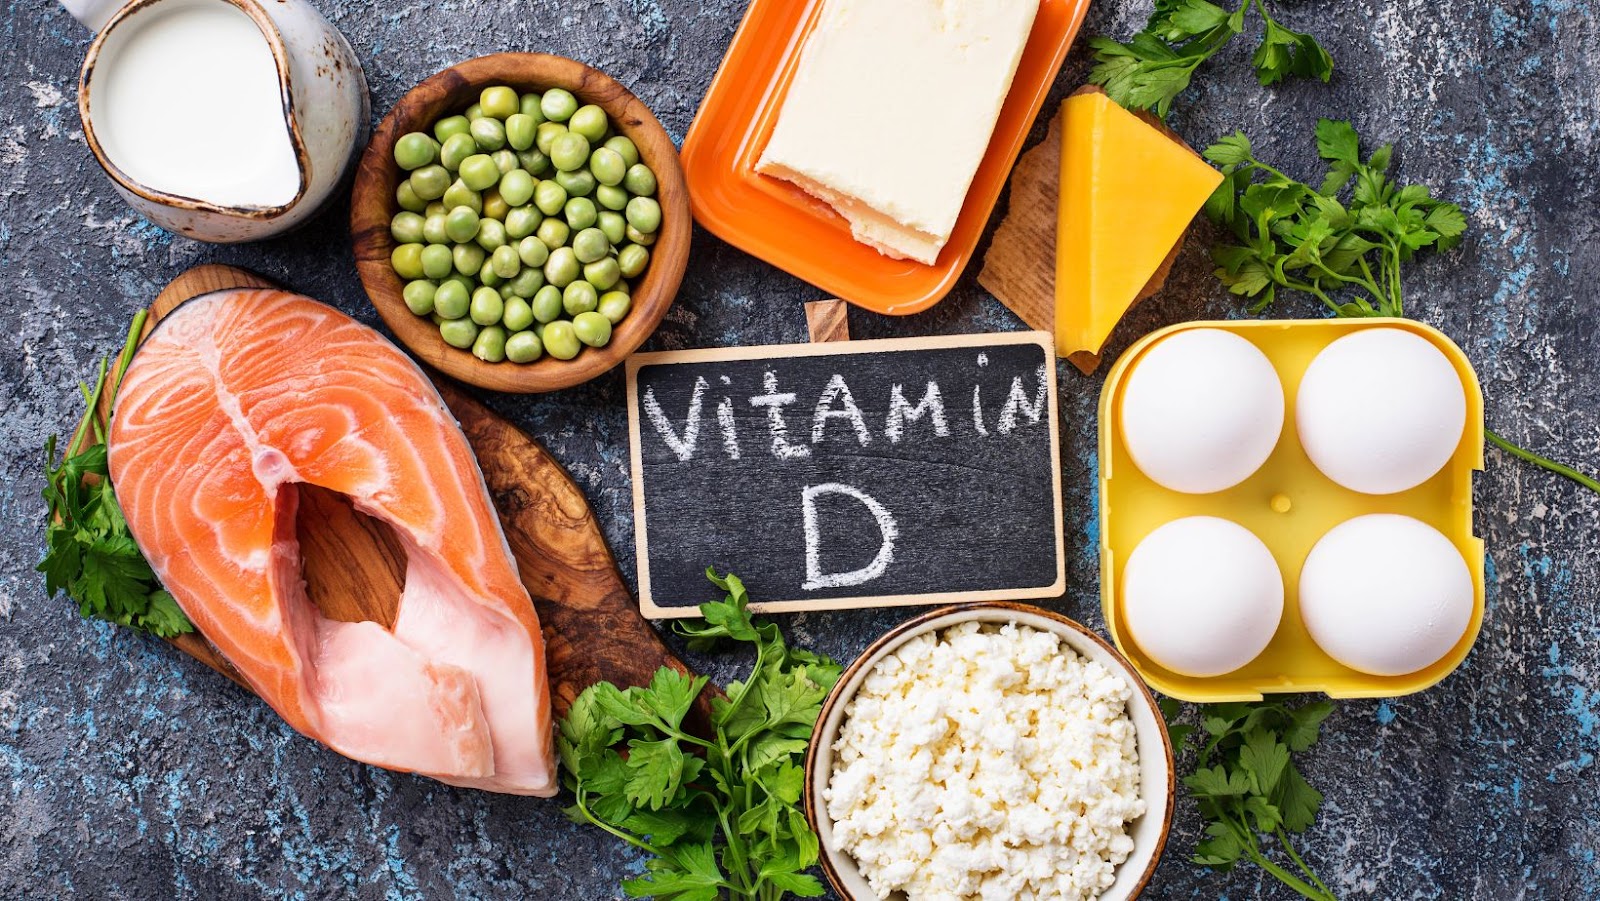 Revealed: How Long Does Vitamin D Take to Work For Me?